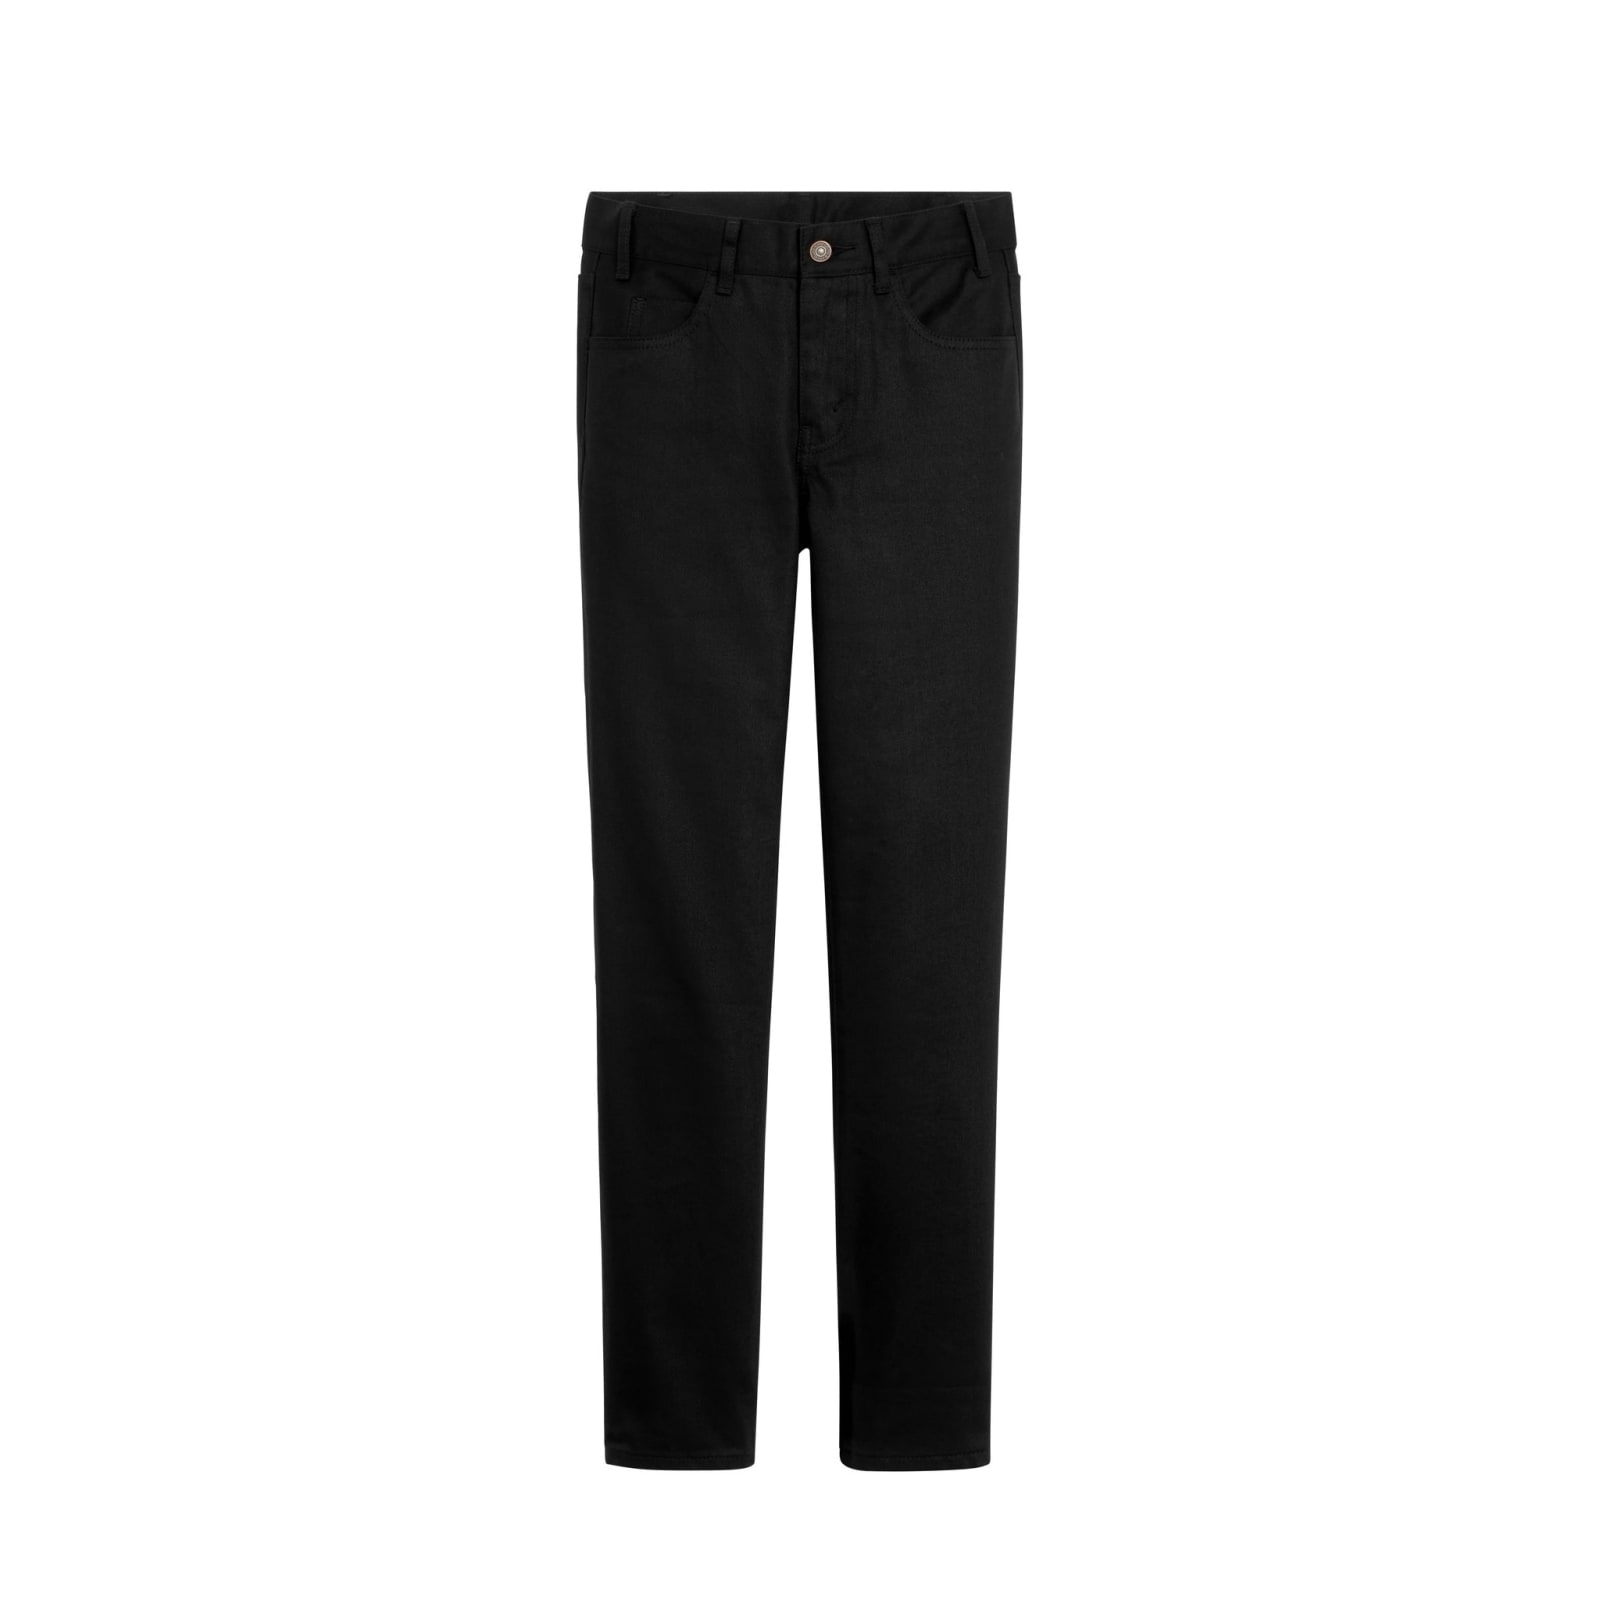 Low Rise Skinny Fit Jeans